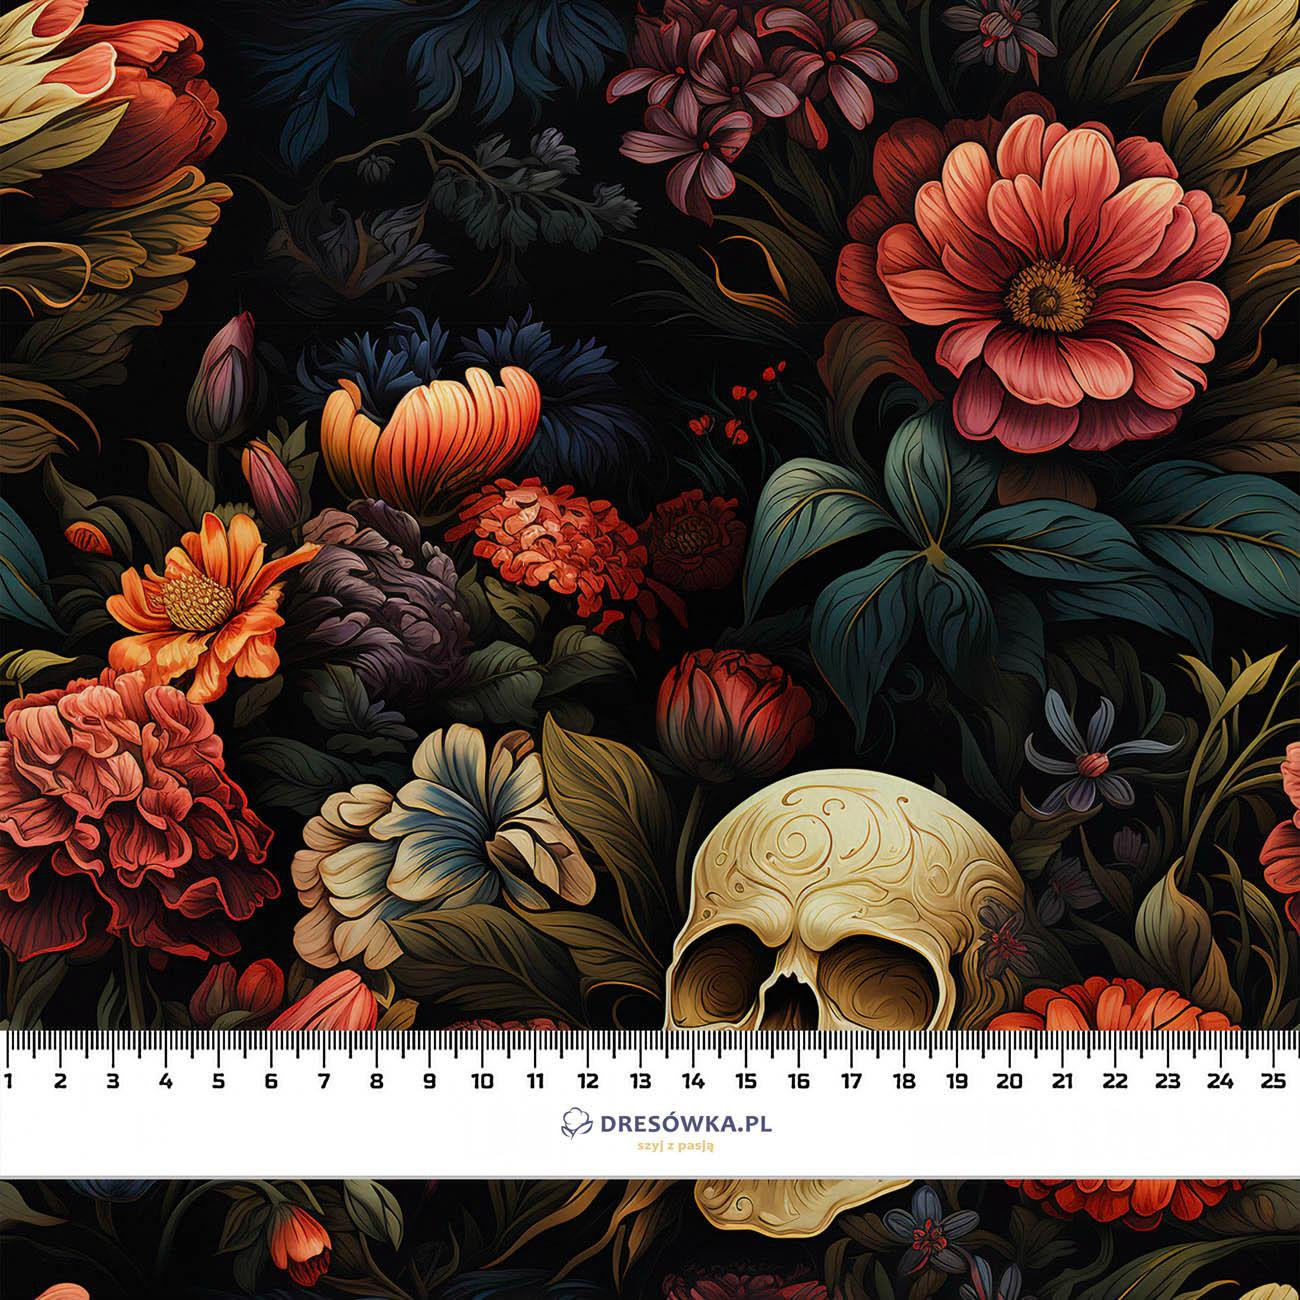 FLOWERS AND SKULL - Waterproof woven fabric